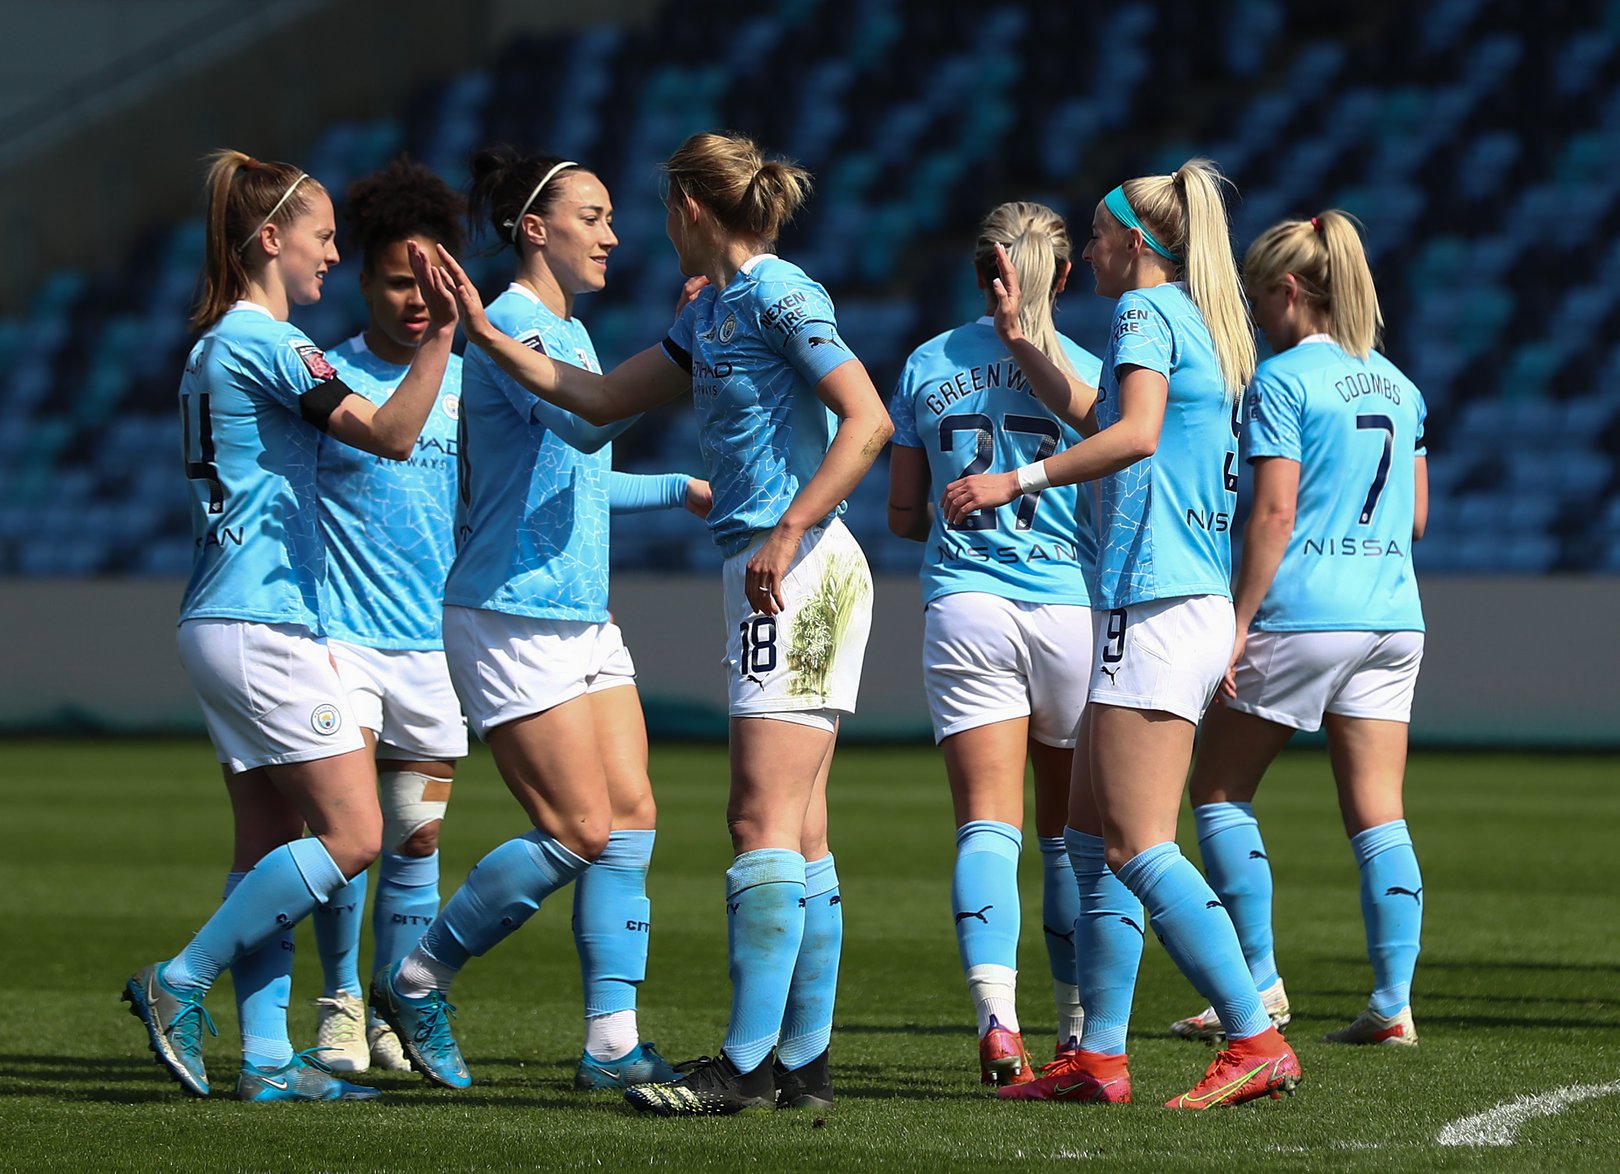 City to face Leicester in Women’s FA Cup quarter-final